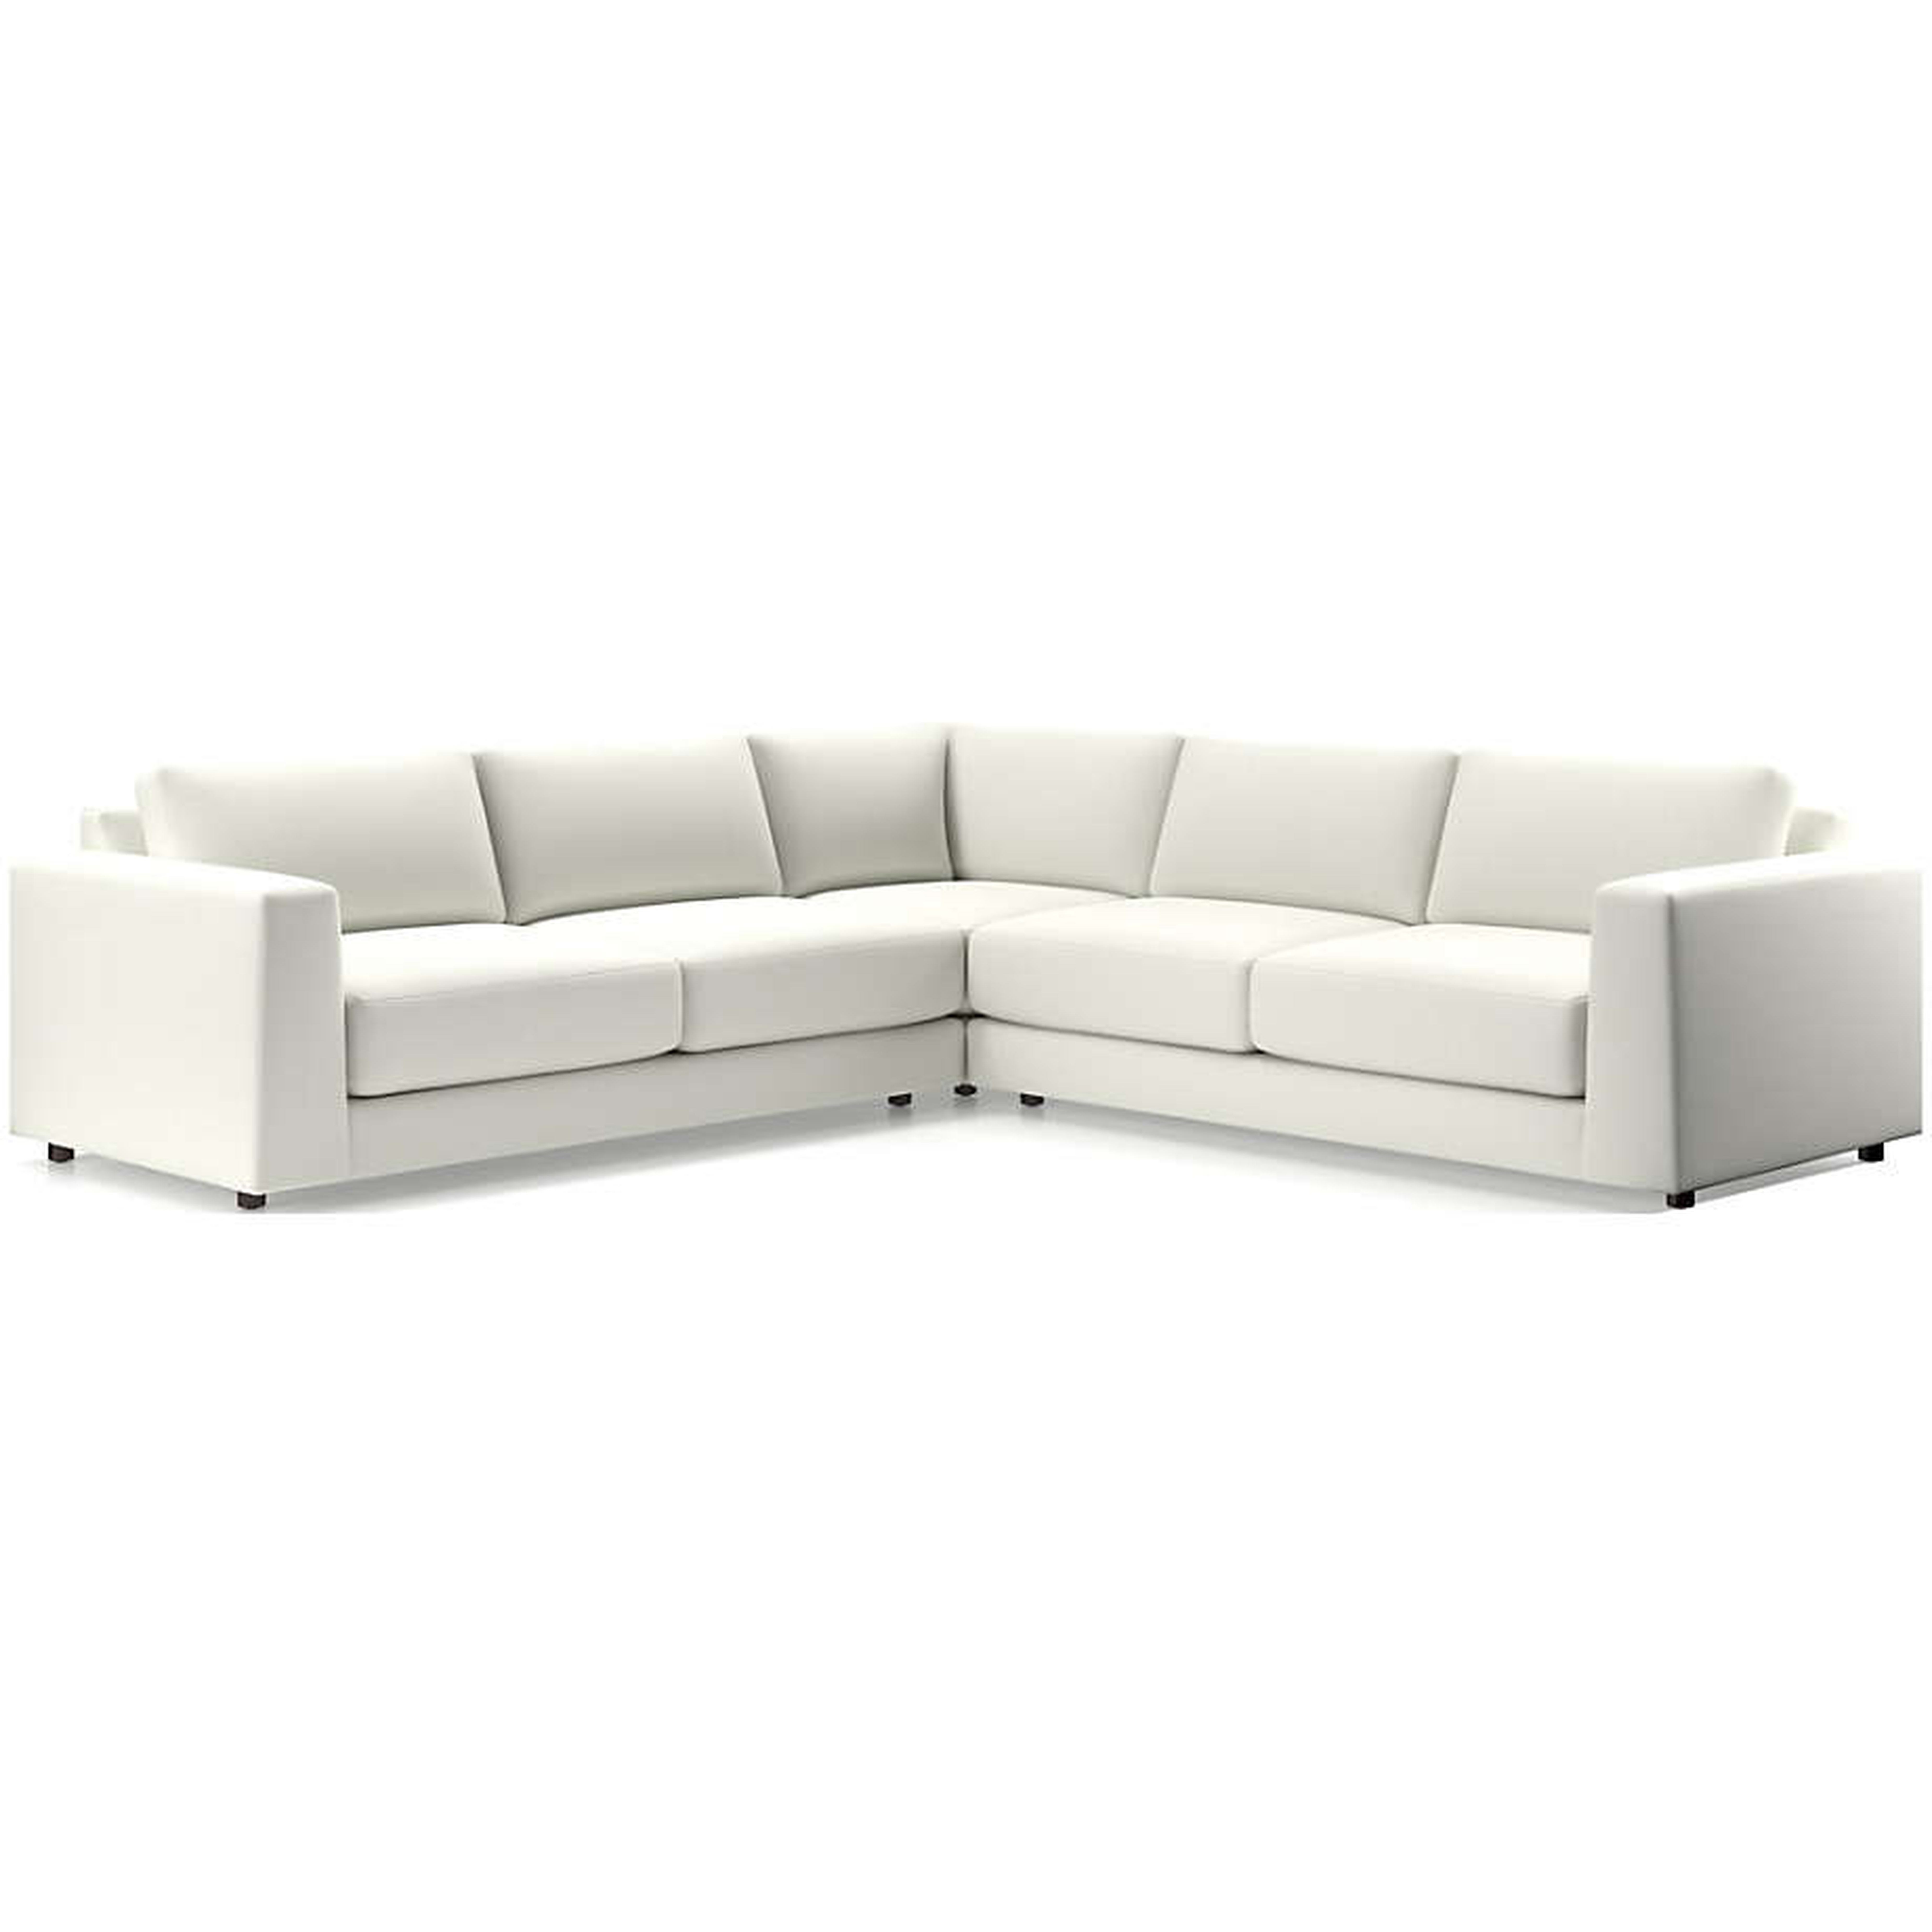 Peyton 3-Piece Sectional - SHELLY, ICE - Crate and Barrel